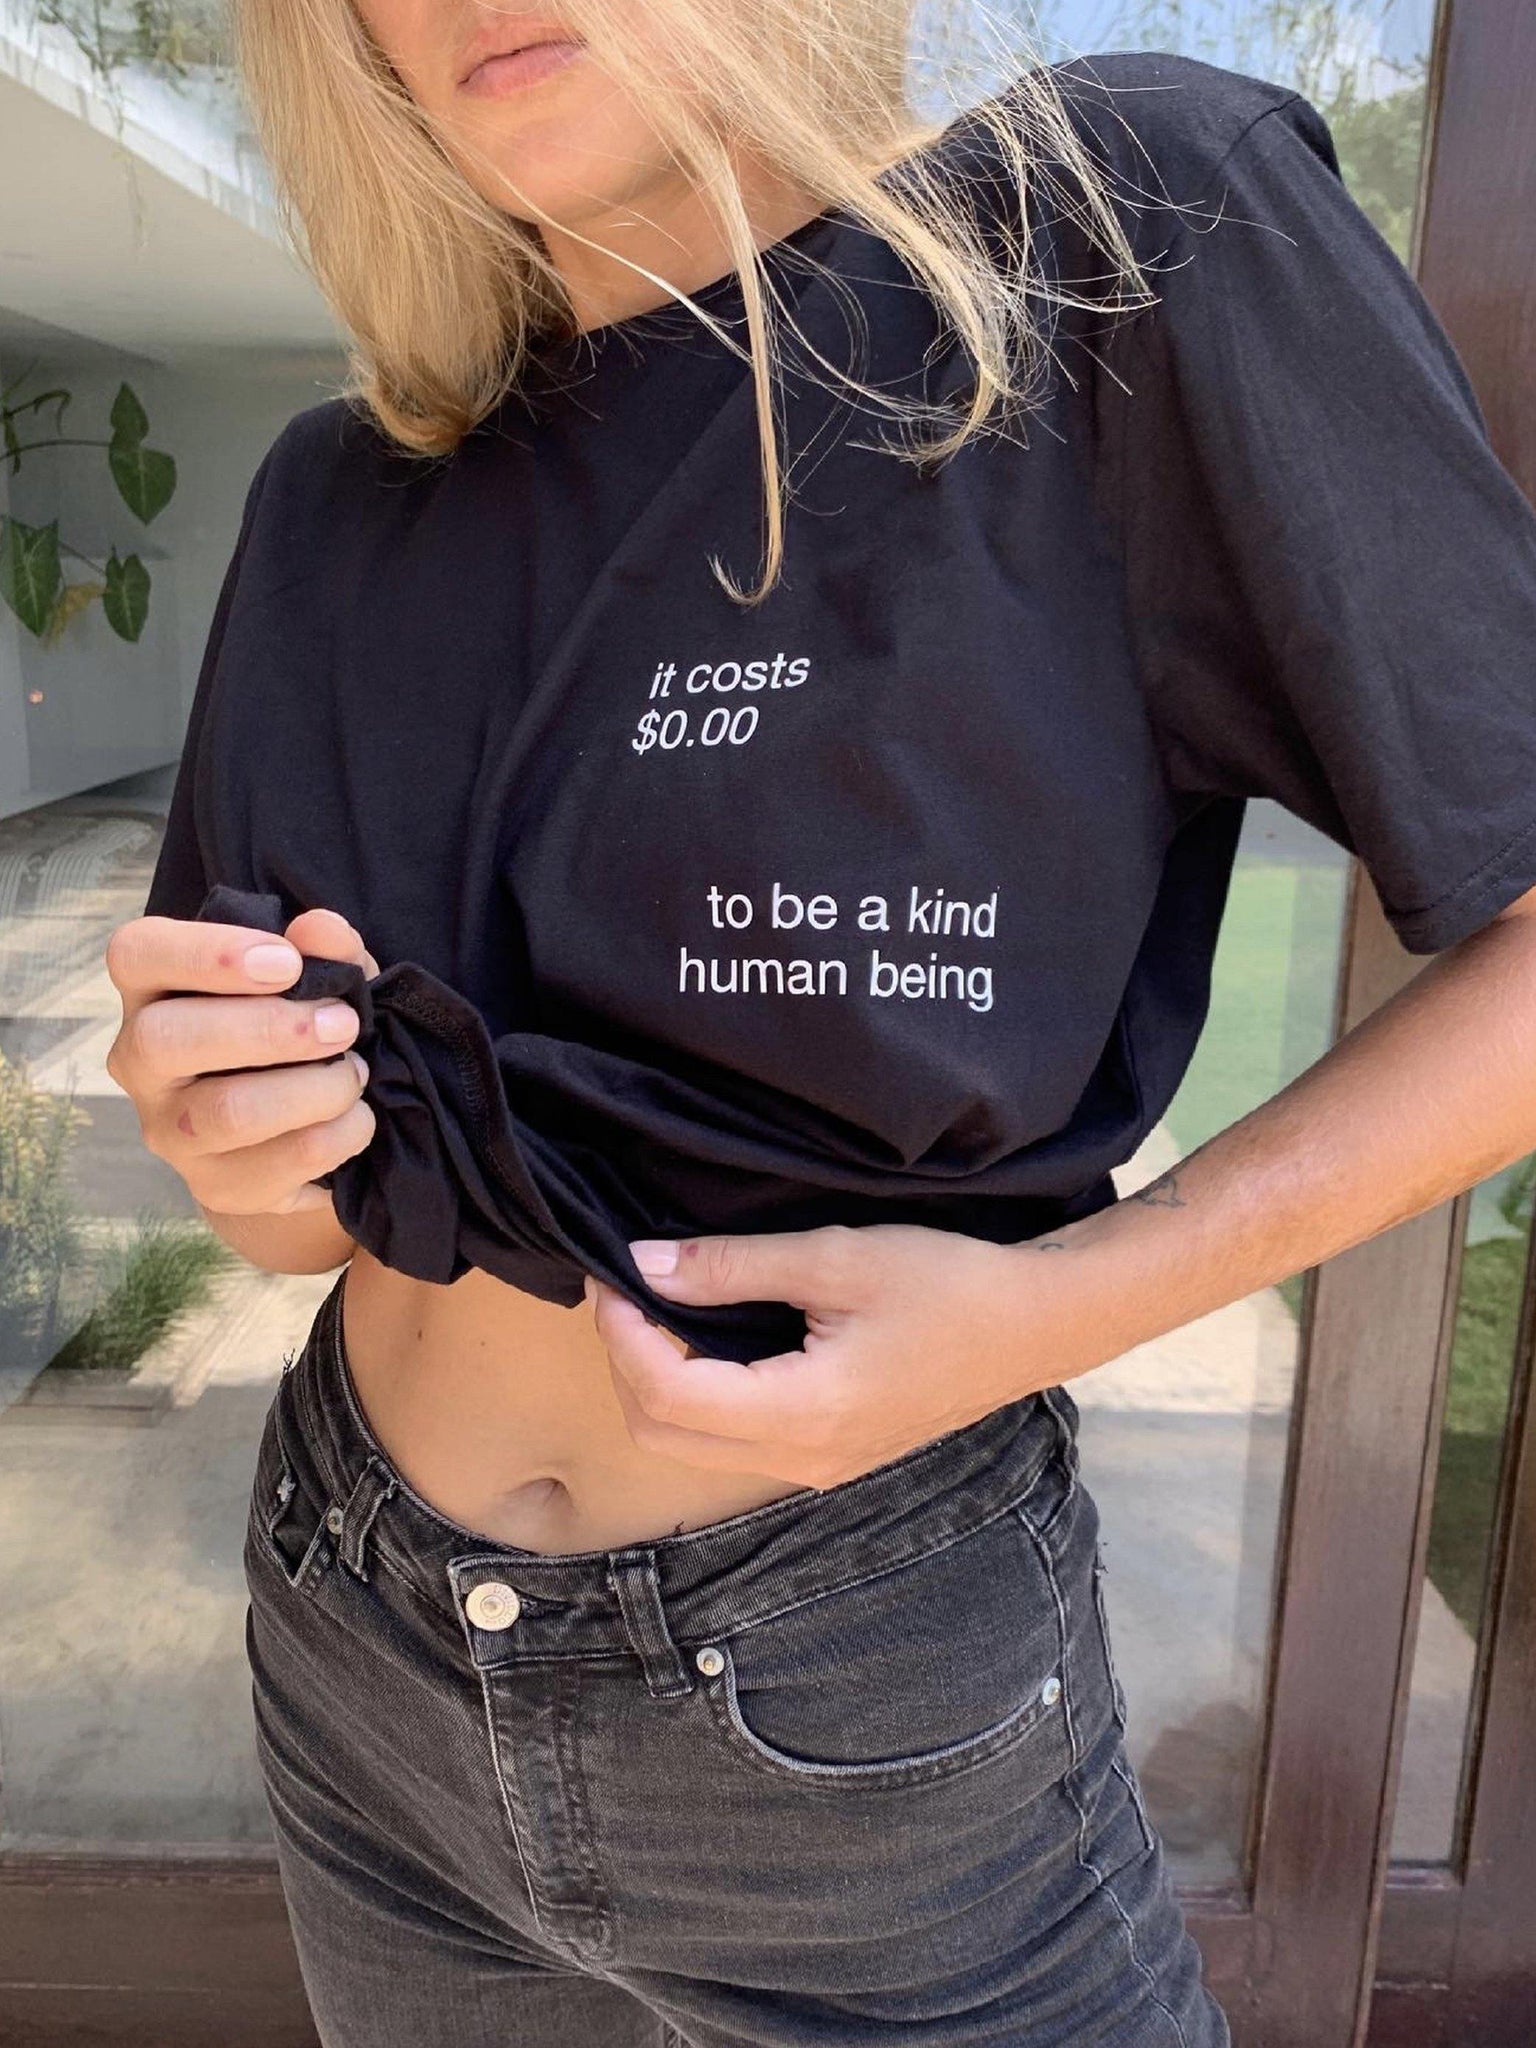 It costs $0.00 to be a kind human being T-Shirt - You Decide Who You Are